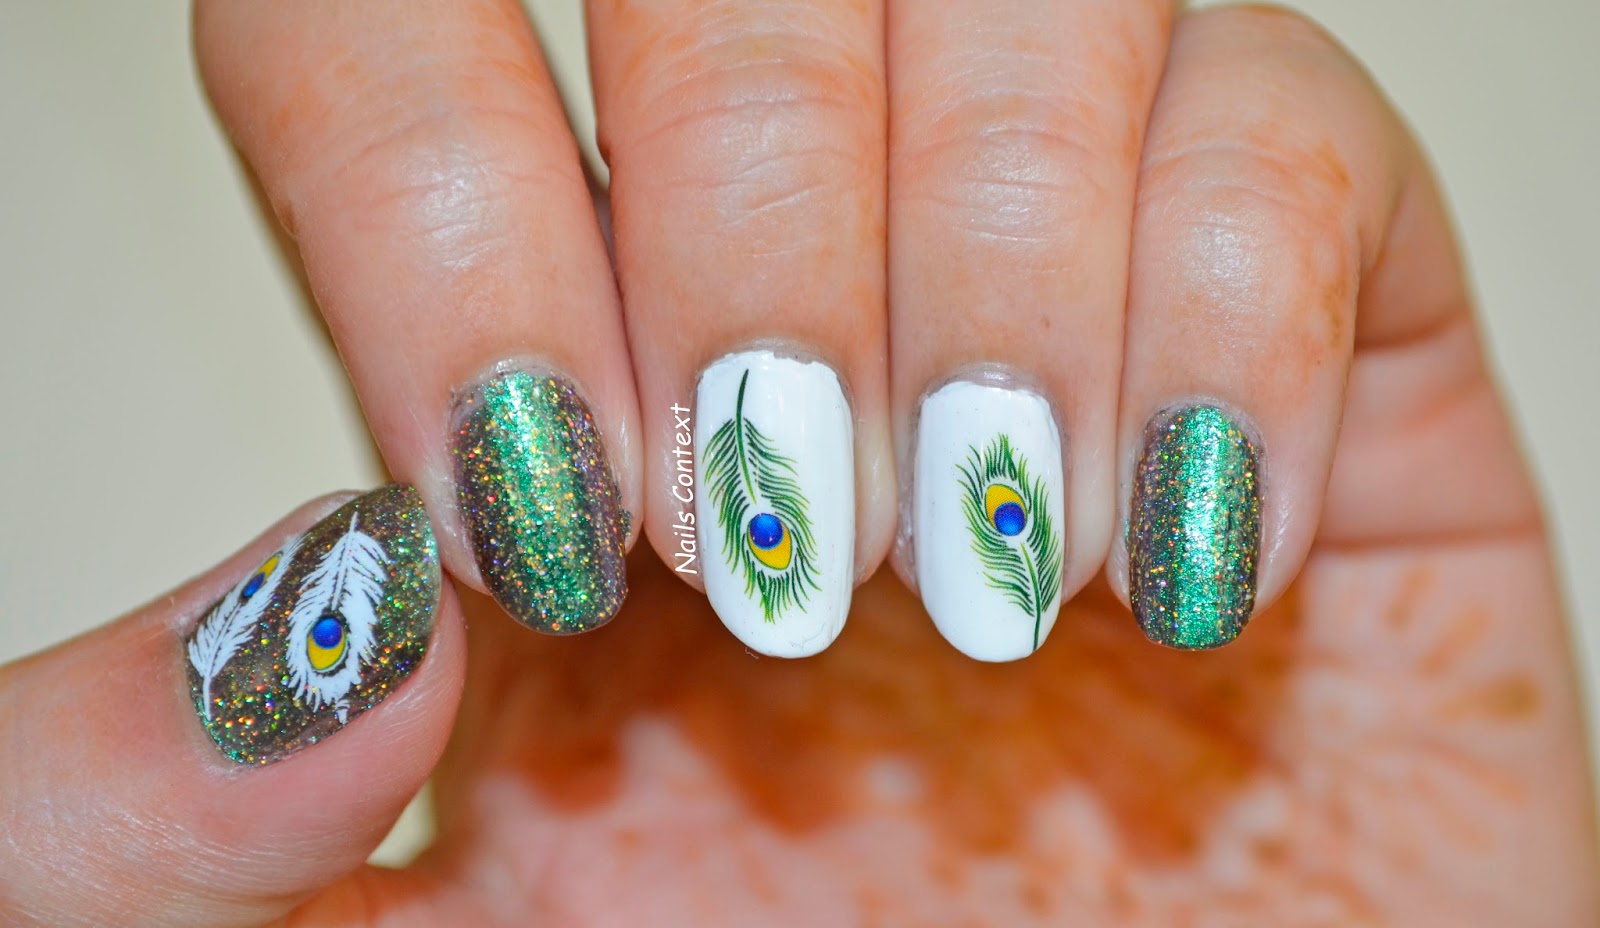 Nails Context: Peacock Feathers